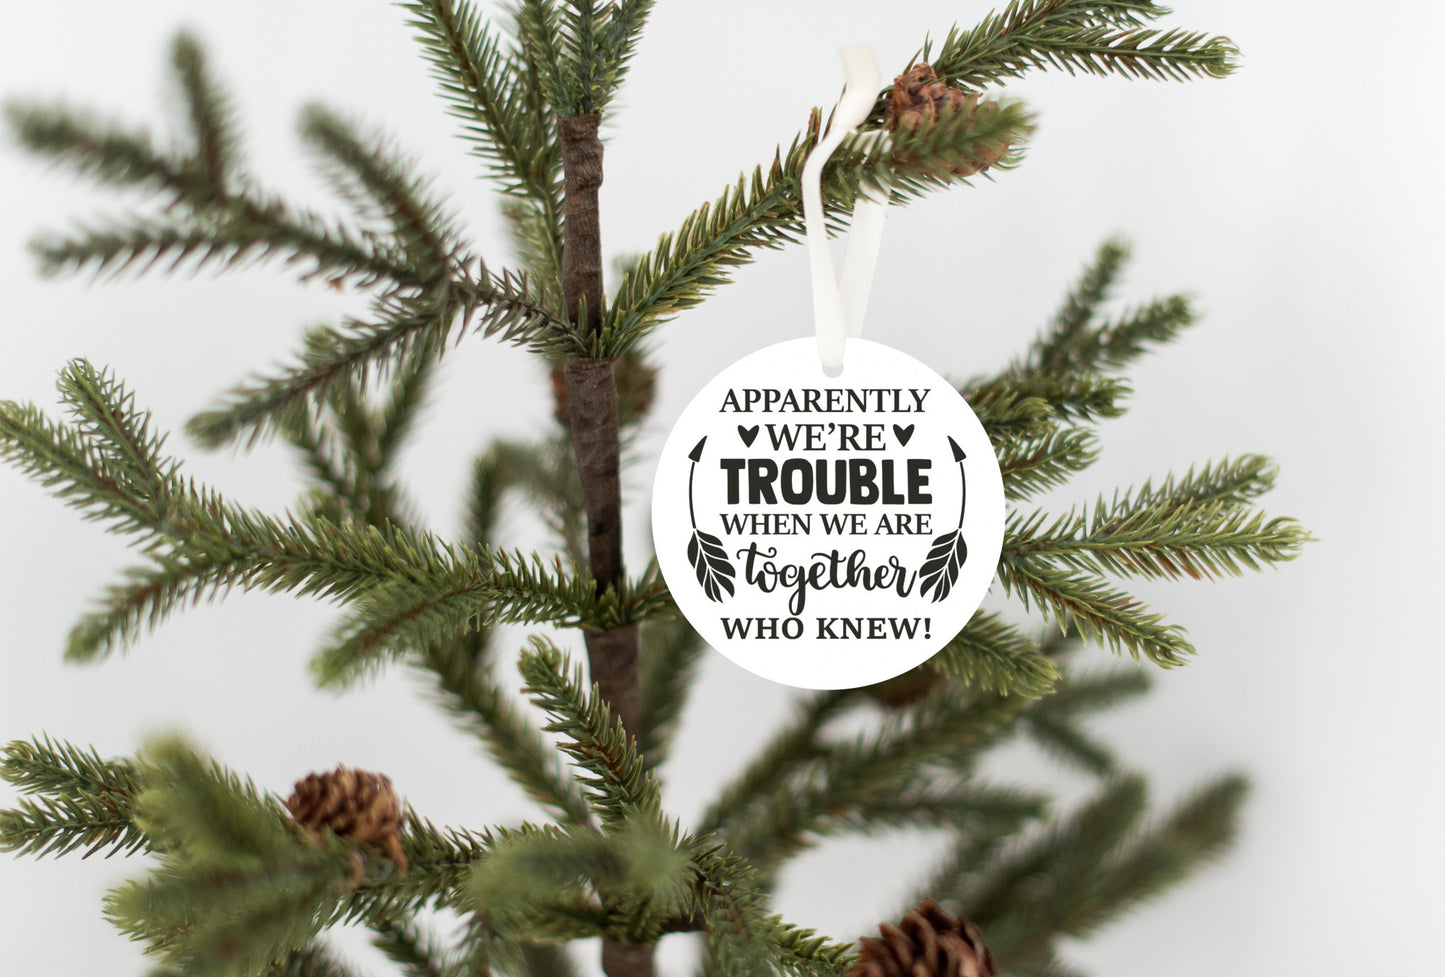 Apparently We're Trouble When We Are Together - Who Knew! Holiday Ornament